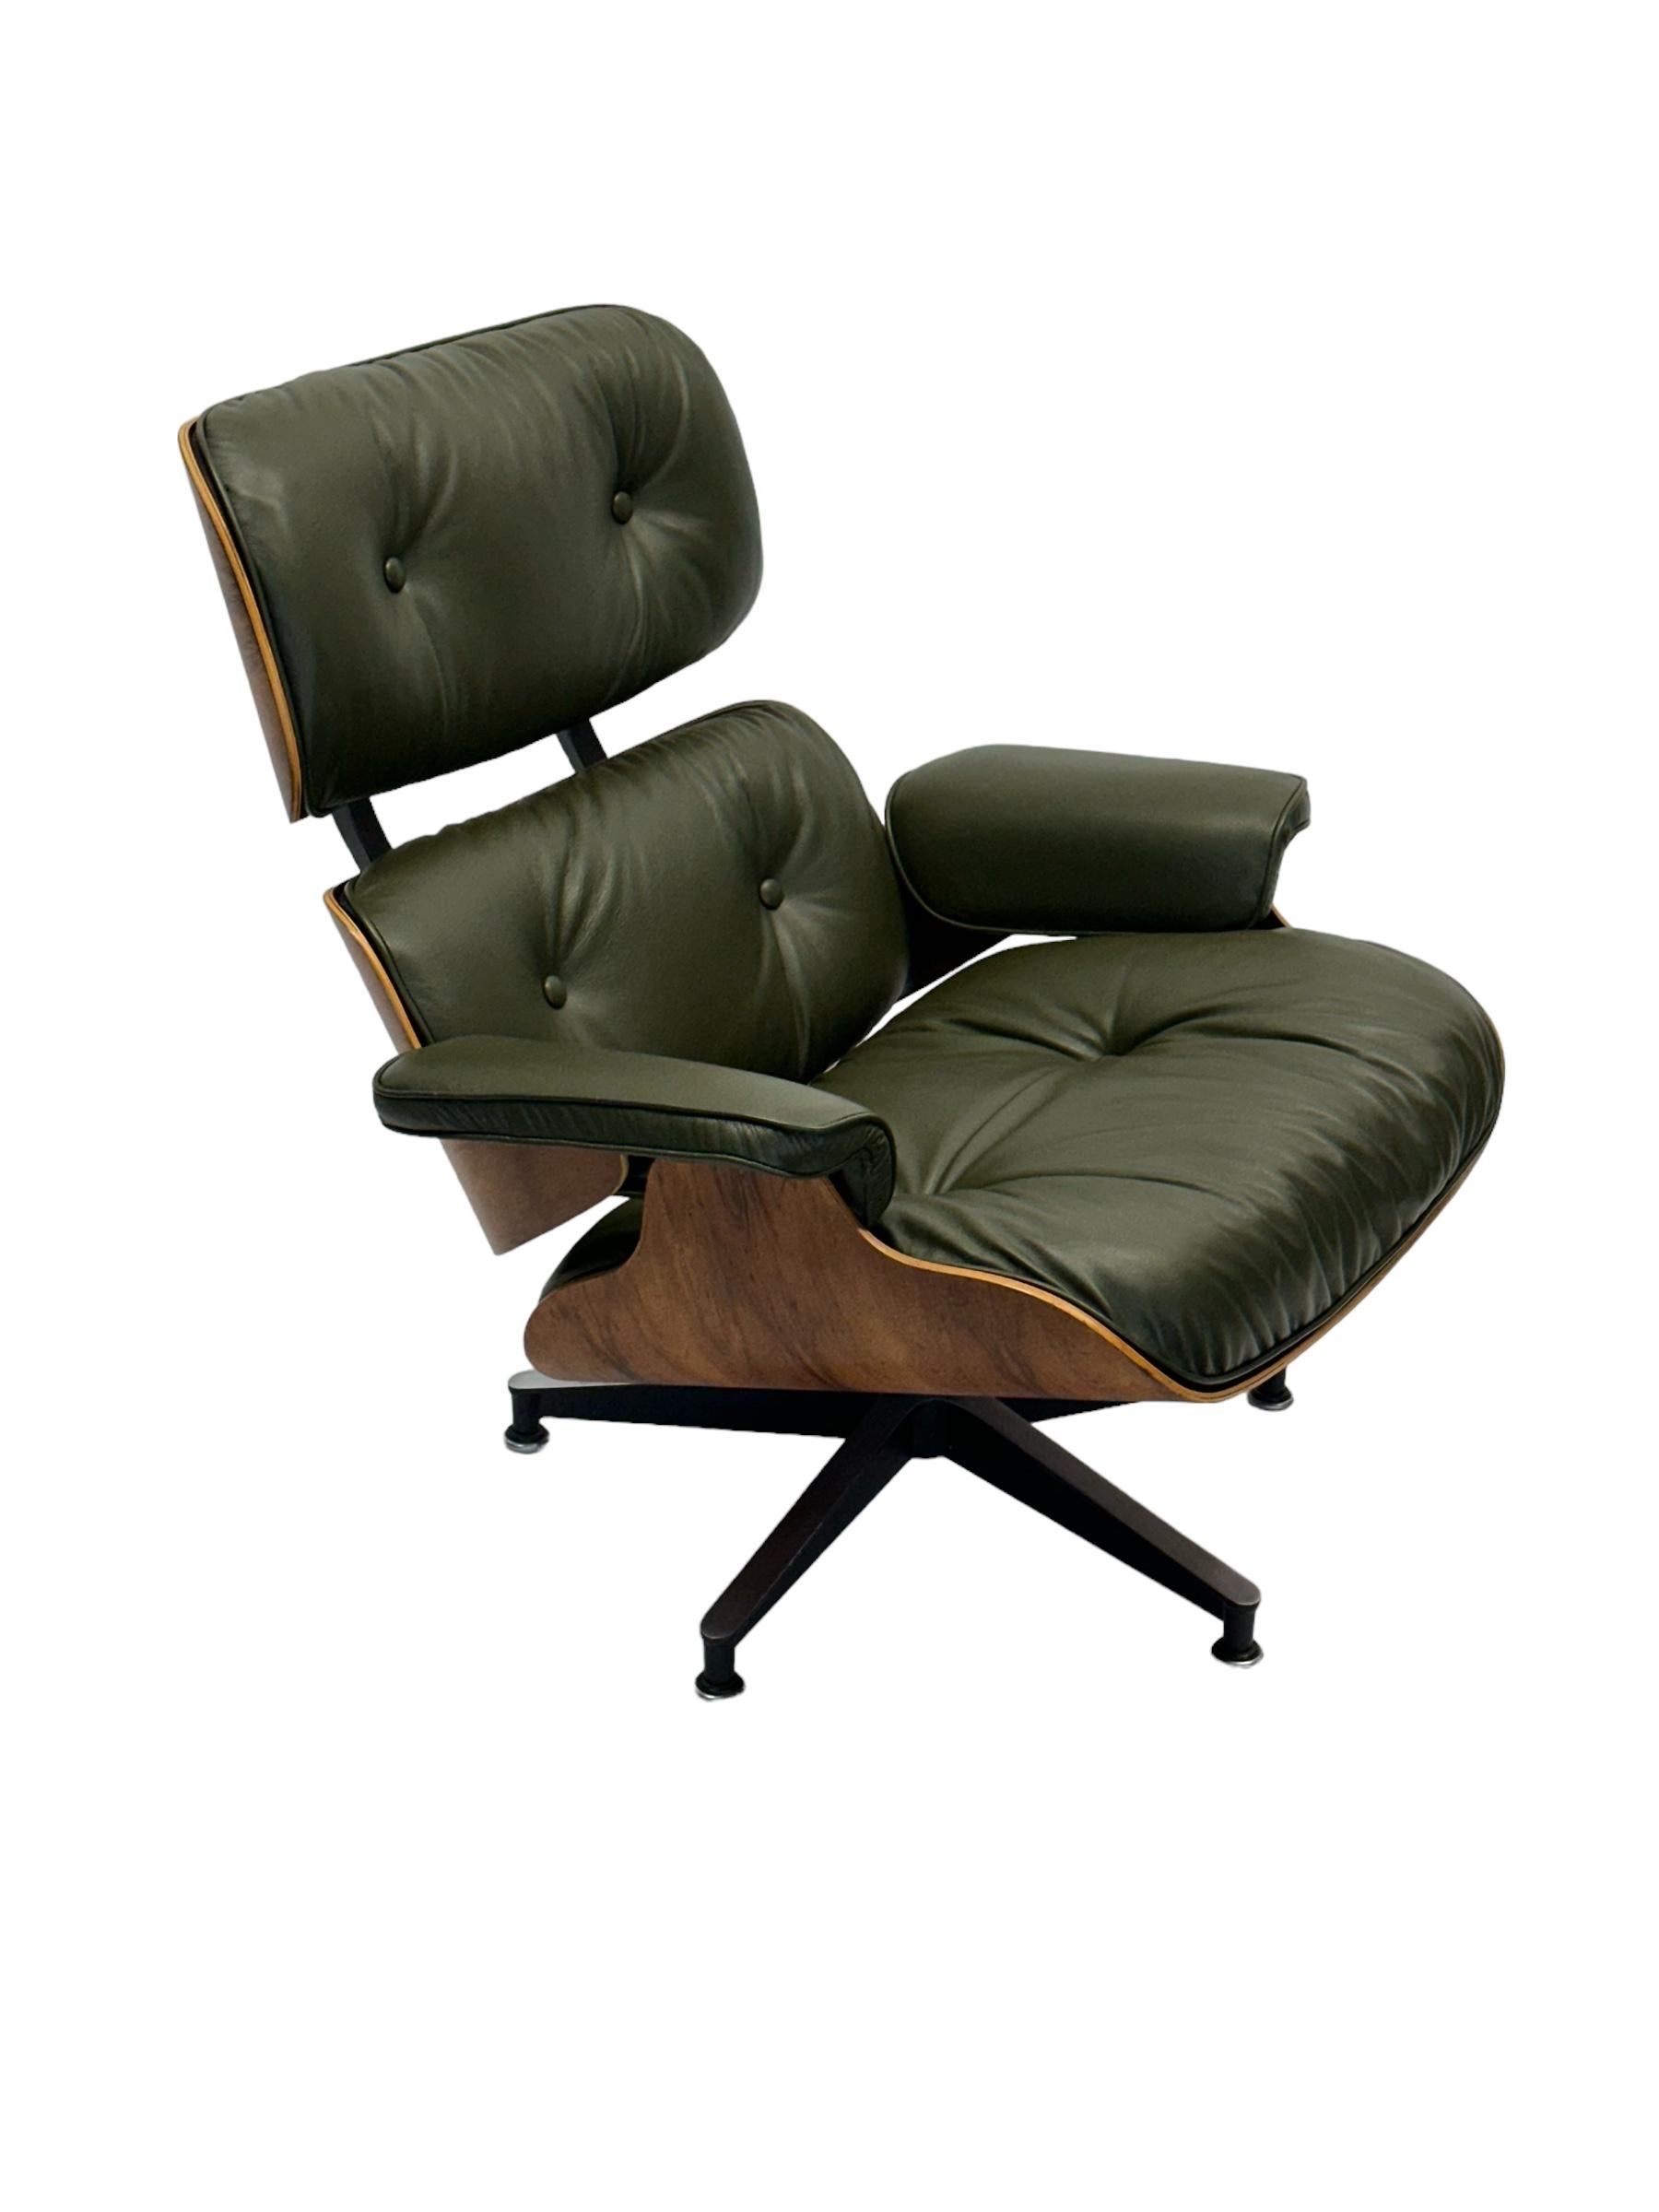 Mid-Century Modern Restored Herman Miller Eames Lounge Chair and Ottoman new Avocado Leather  